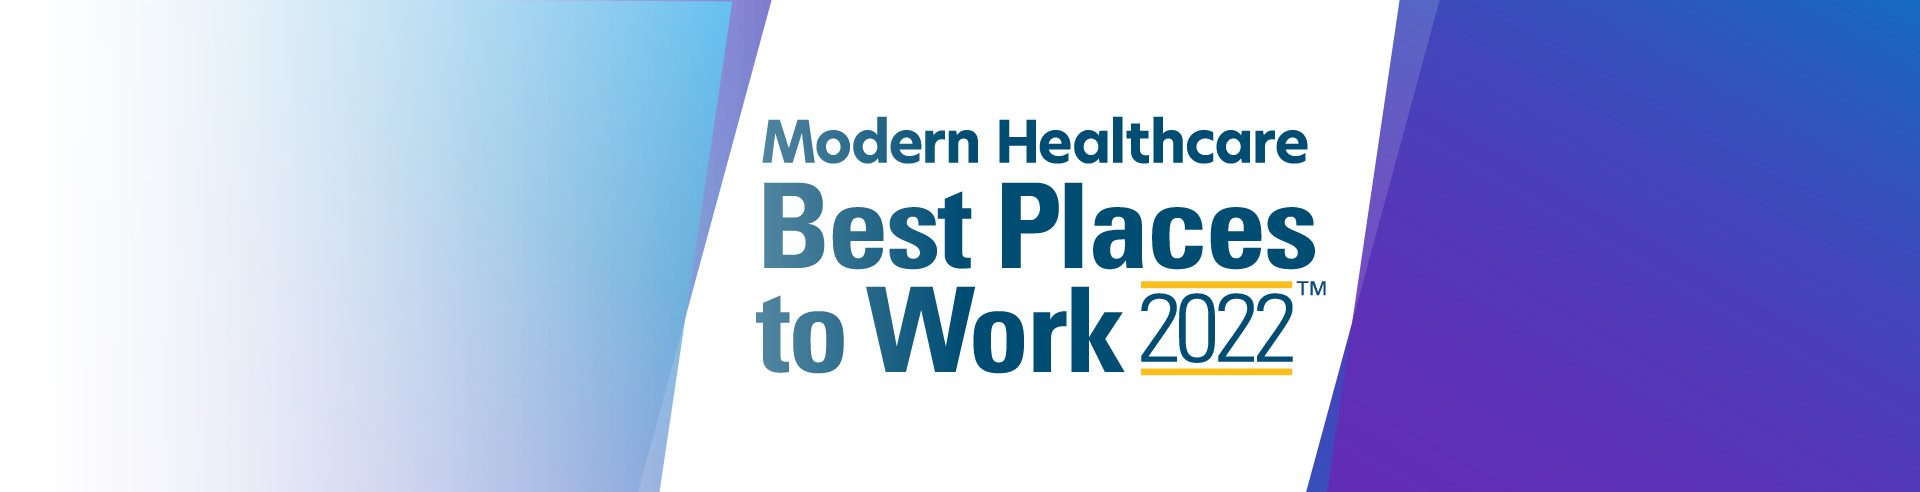 Modern Healthcare Best Places to work